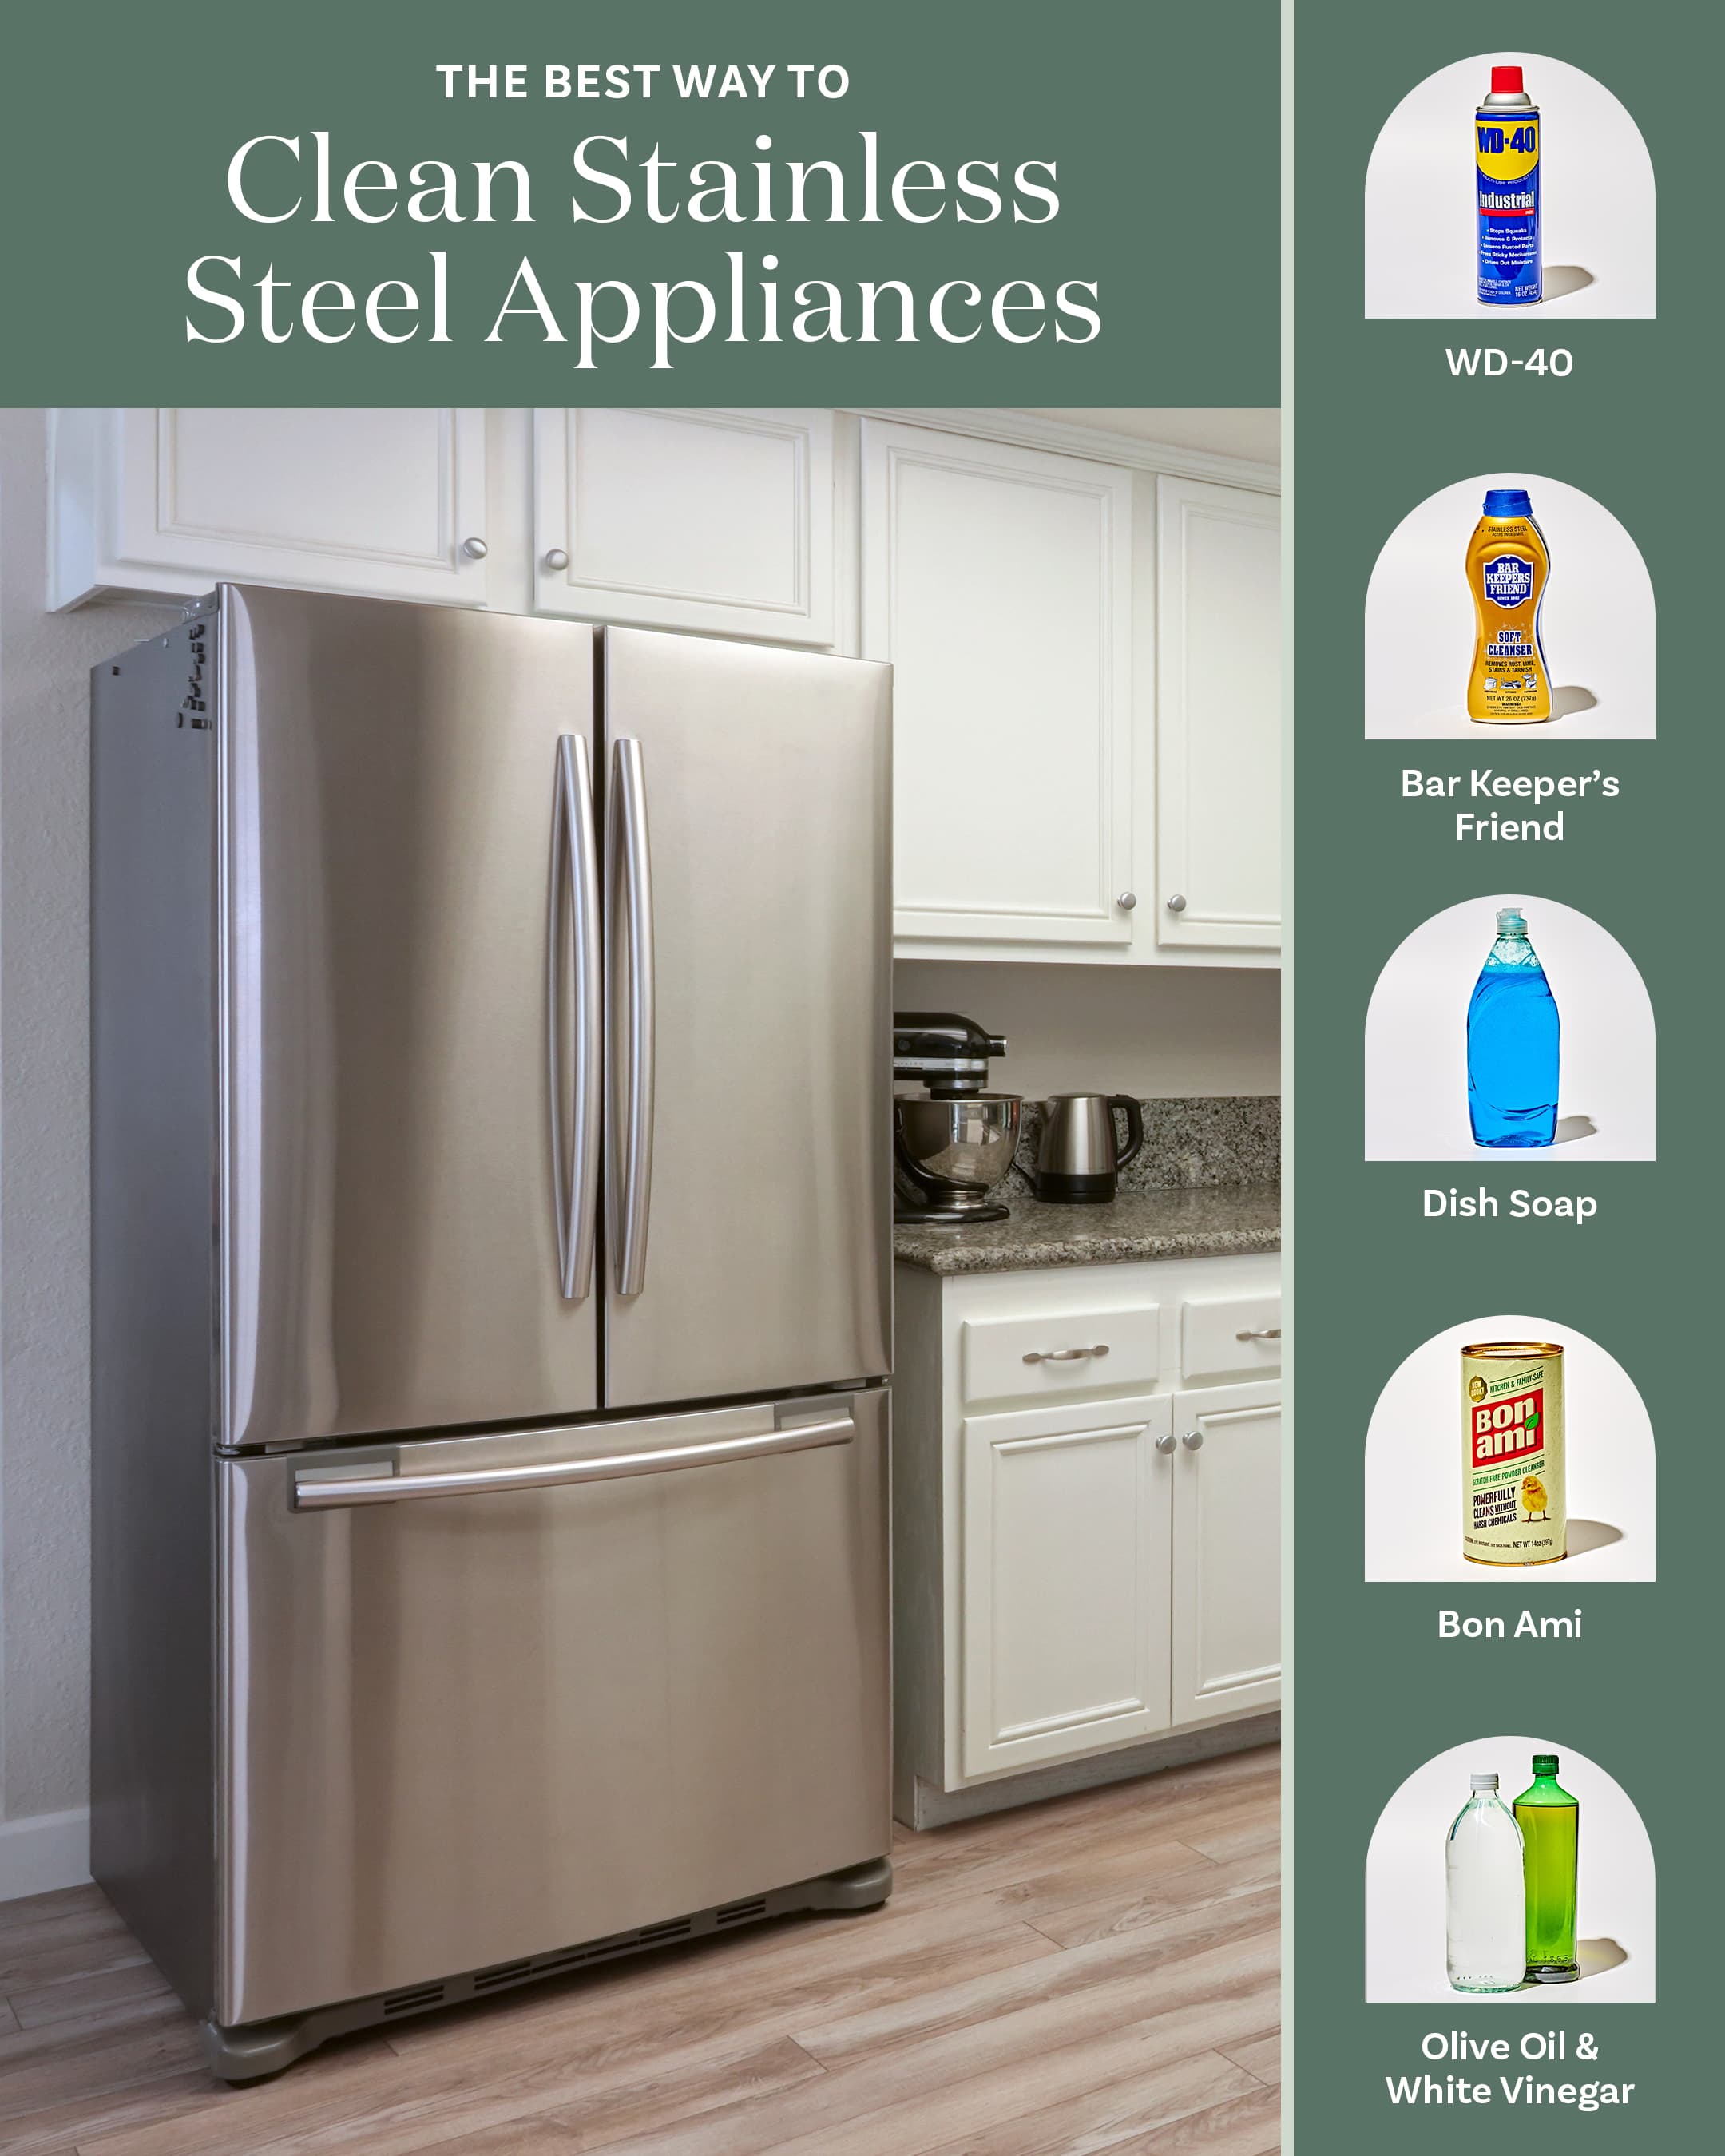 https://cdn.apartmenttherapy.info/image/upload/v1679691800/k/Photo/Series/2021-12-Skills-Showdown-How-to-Clean-Stanless-Steel-Refrigerator/cleaning-showdown-stainless-steel-appliances.jpg